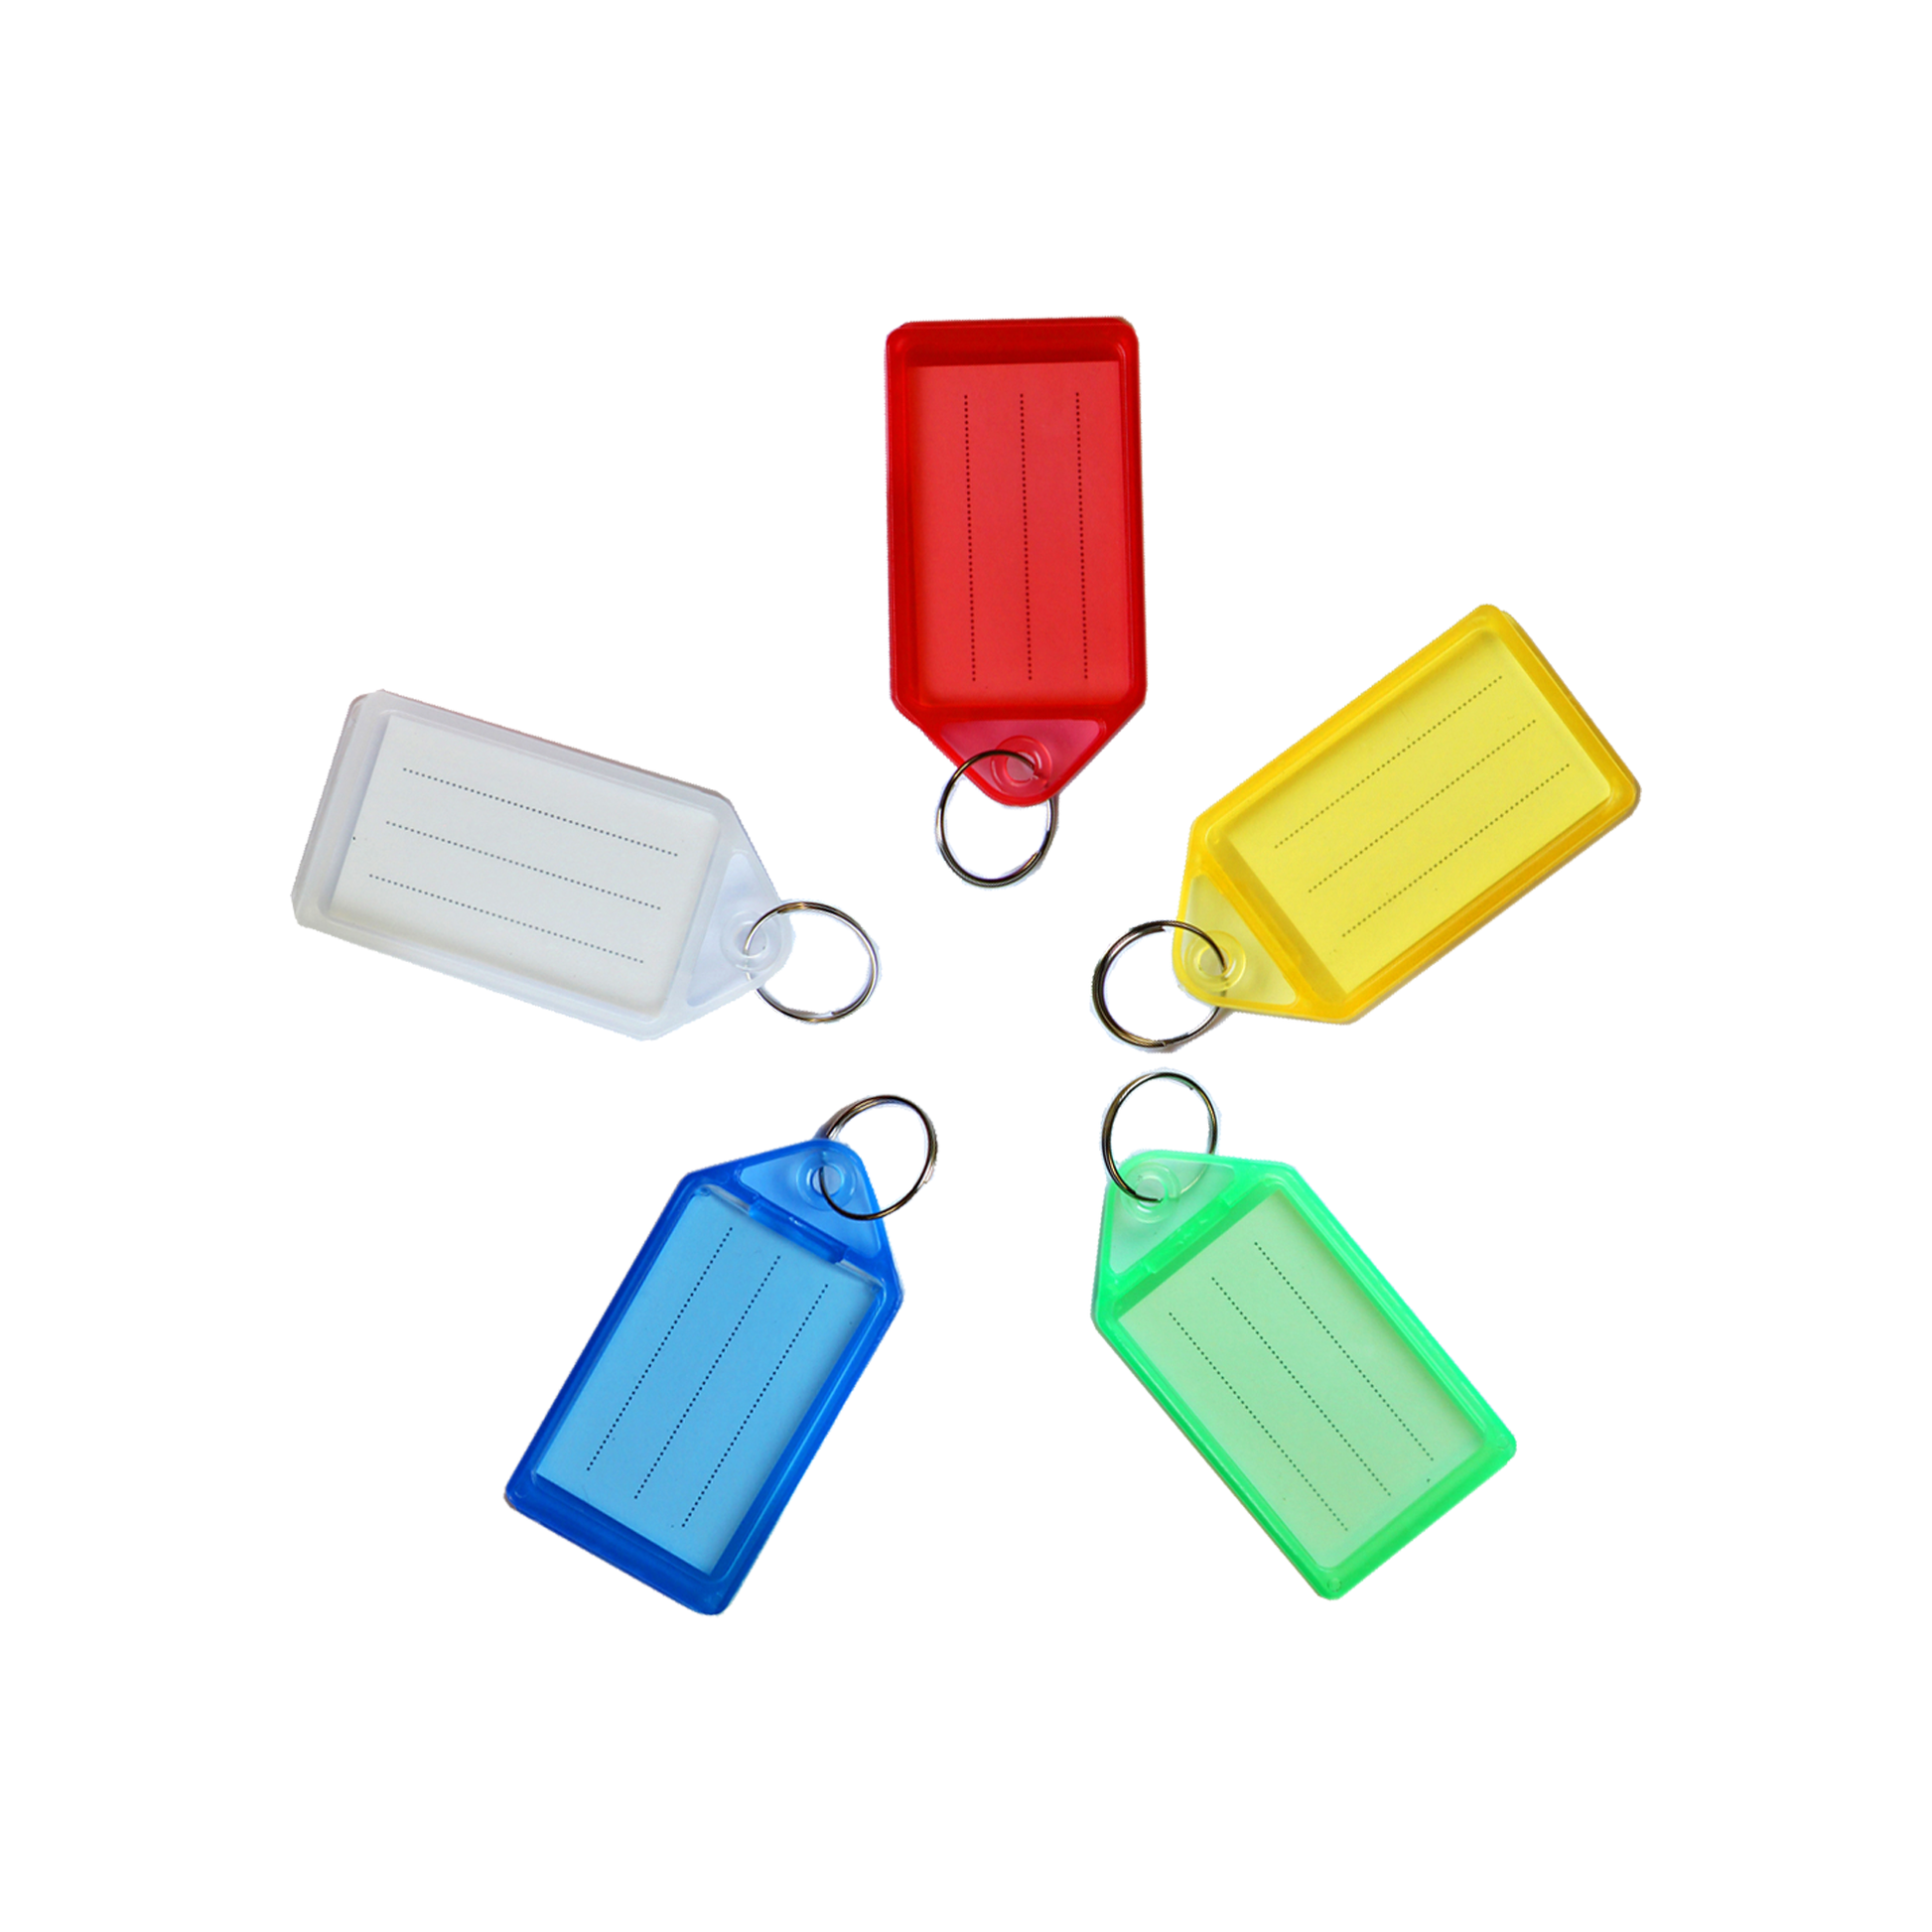 An assortment of large sliding key tags in various colors, including red, yellow, green, blue, and white, each with a paper insert for labeling and a metal key ring for attachment.